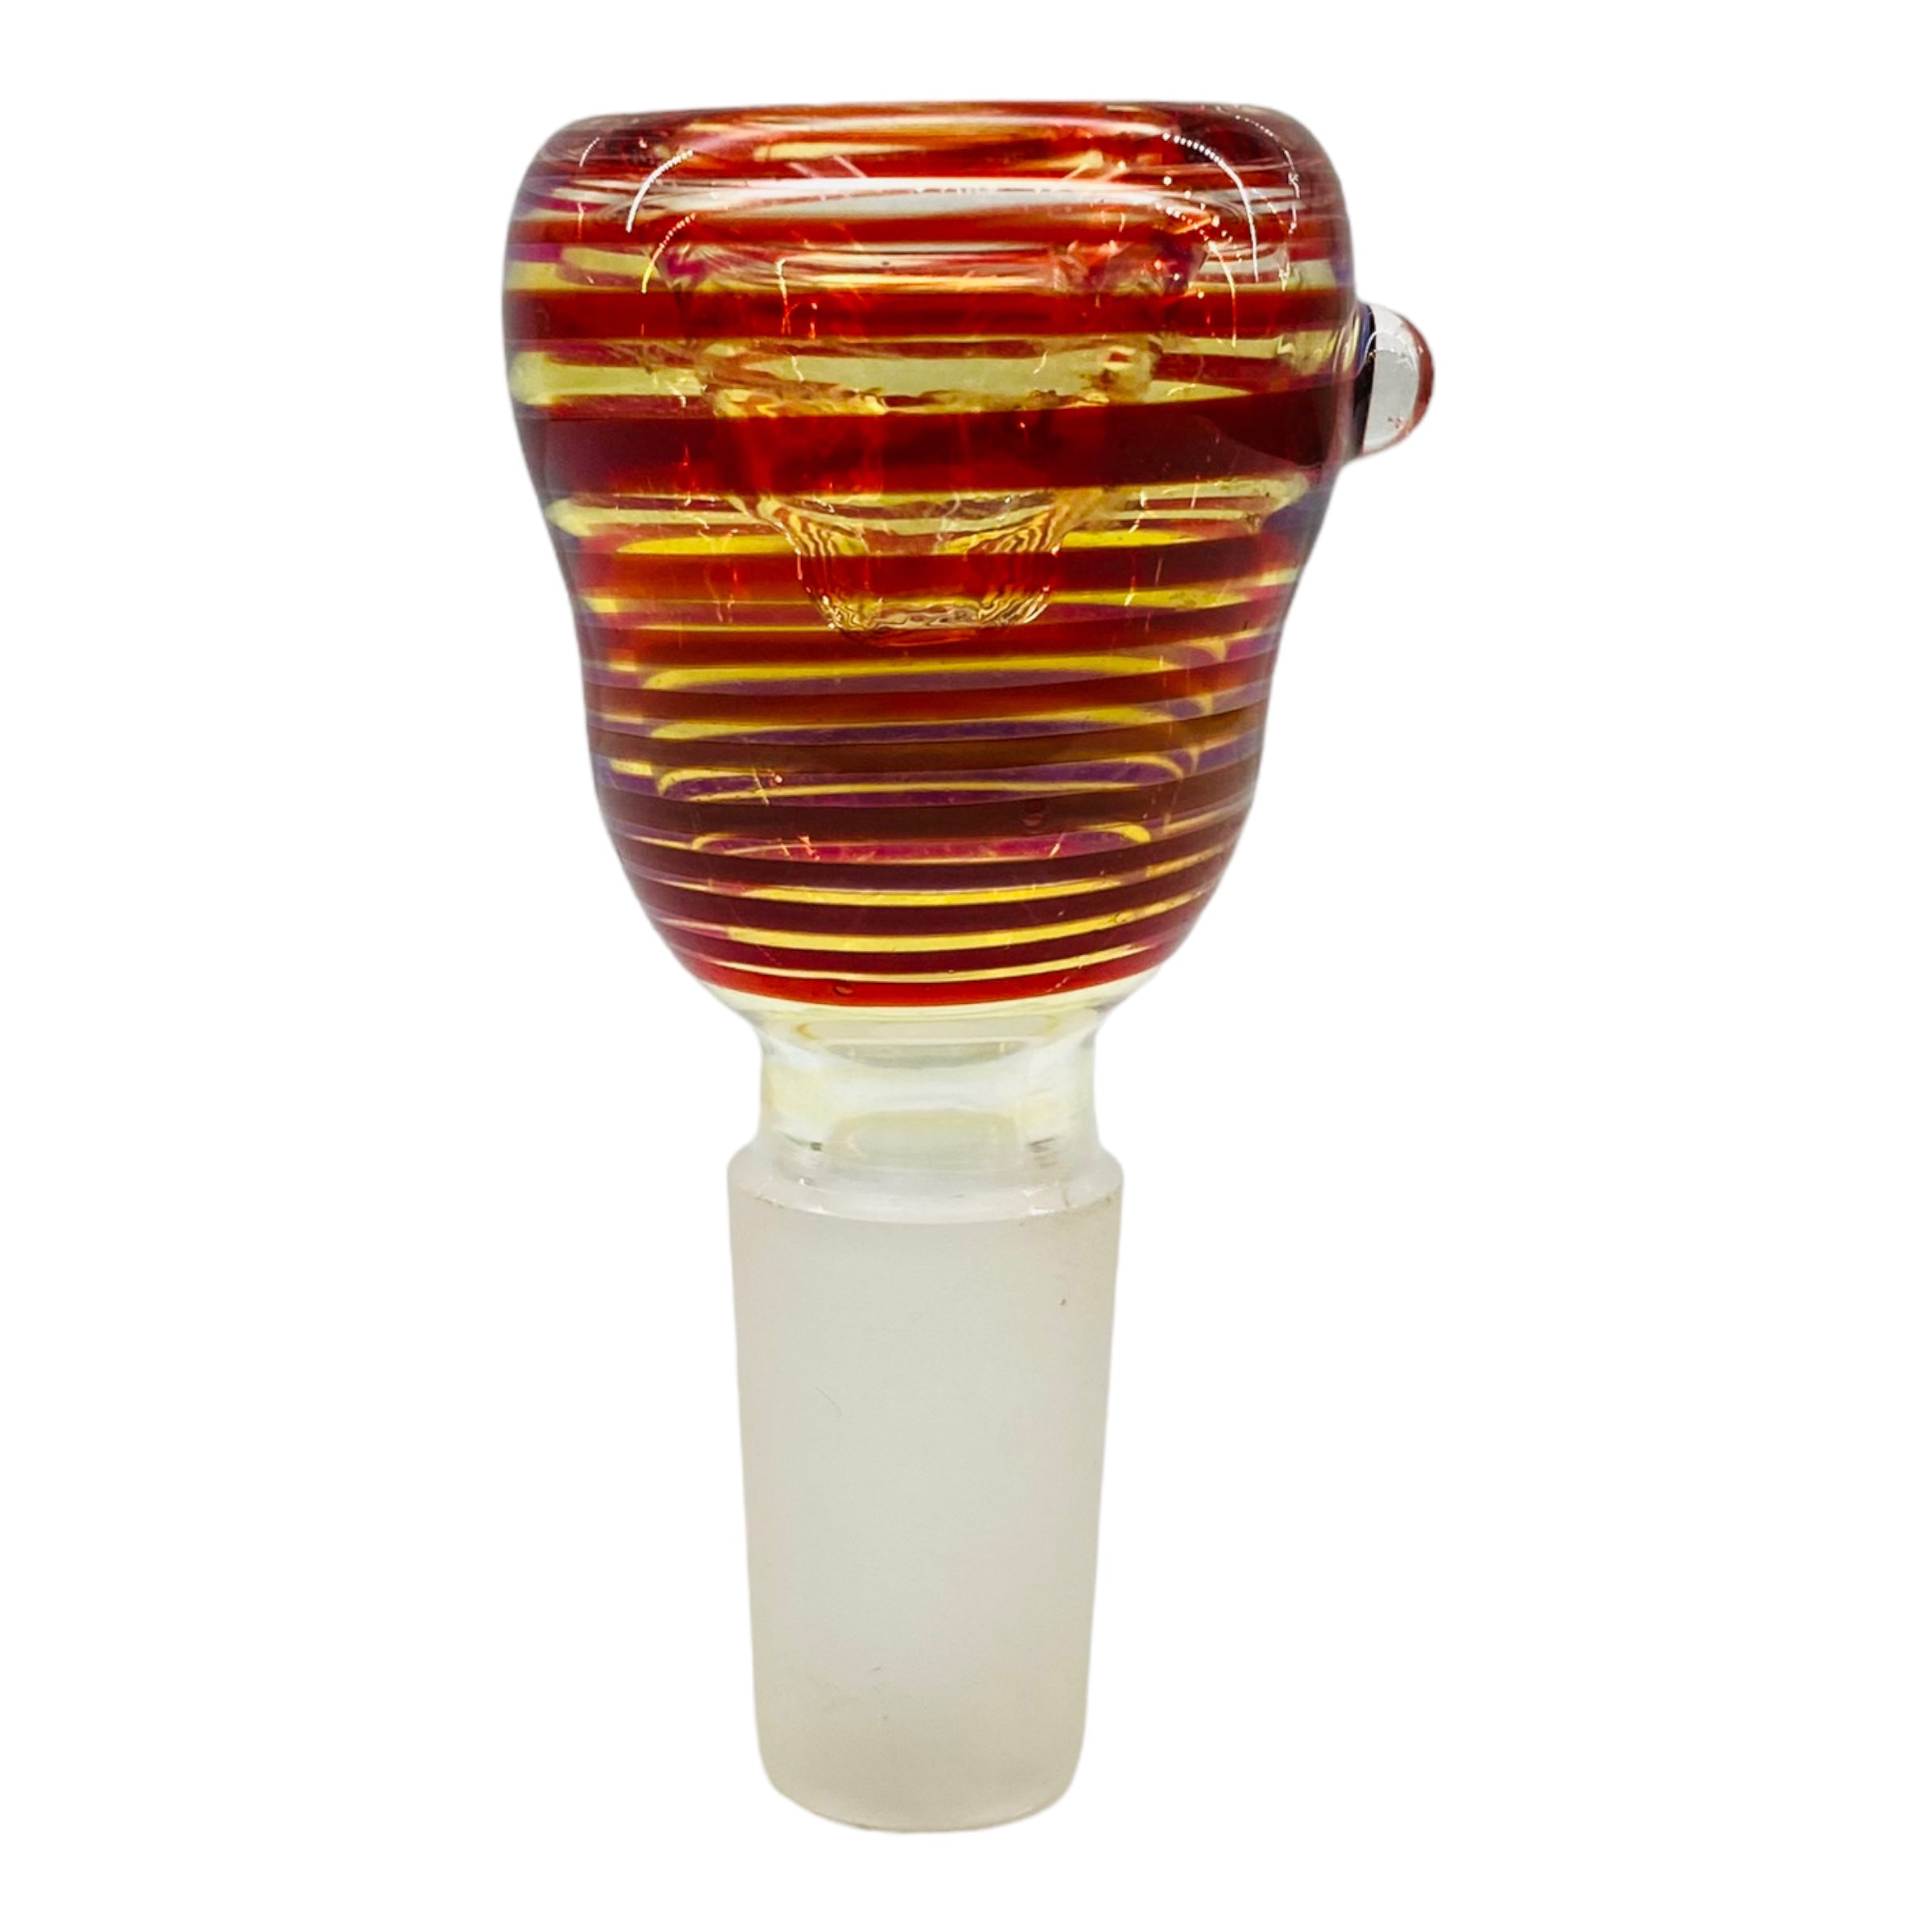 14mm Flower Bowl - Tall Color Bubble Twist Bong Bowl - Red